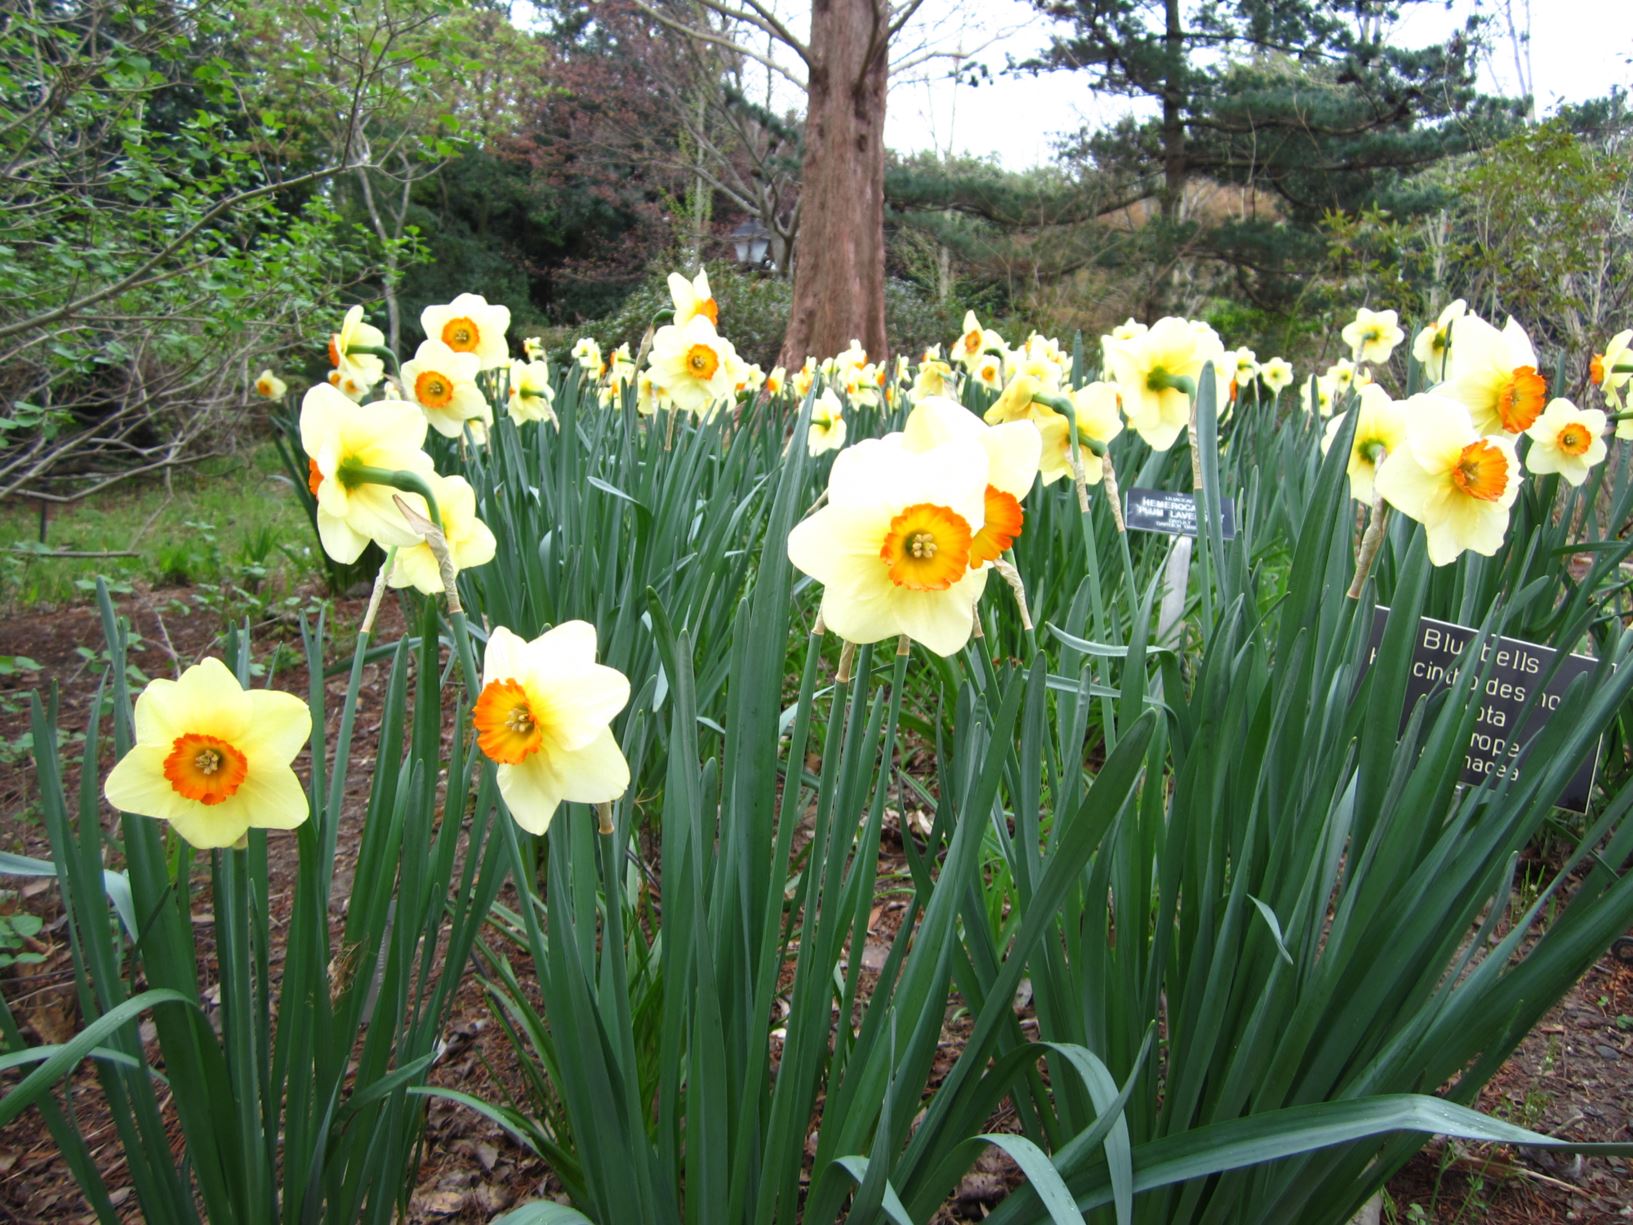 Narcissus 'Limbo' - large-cupped daffodil